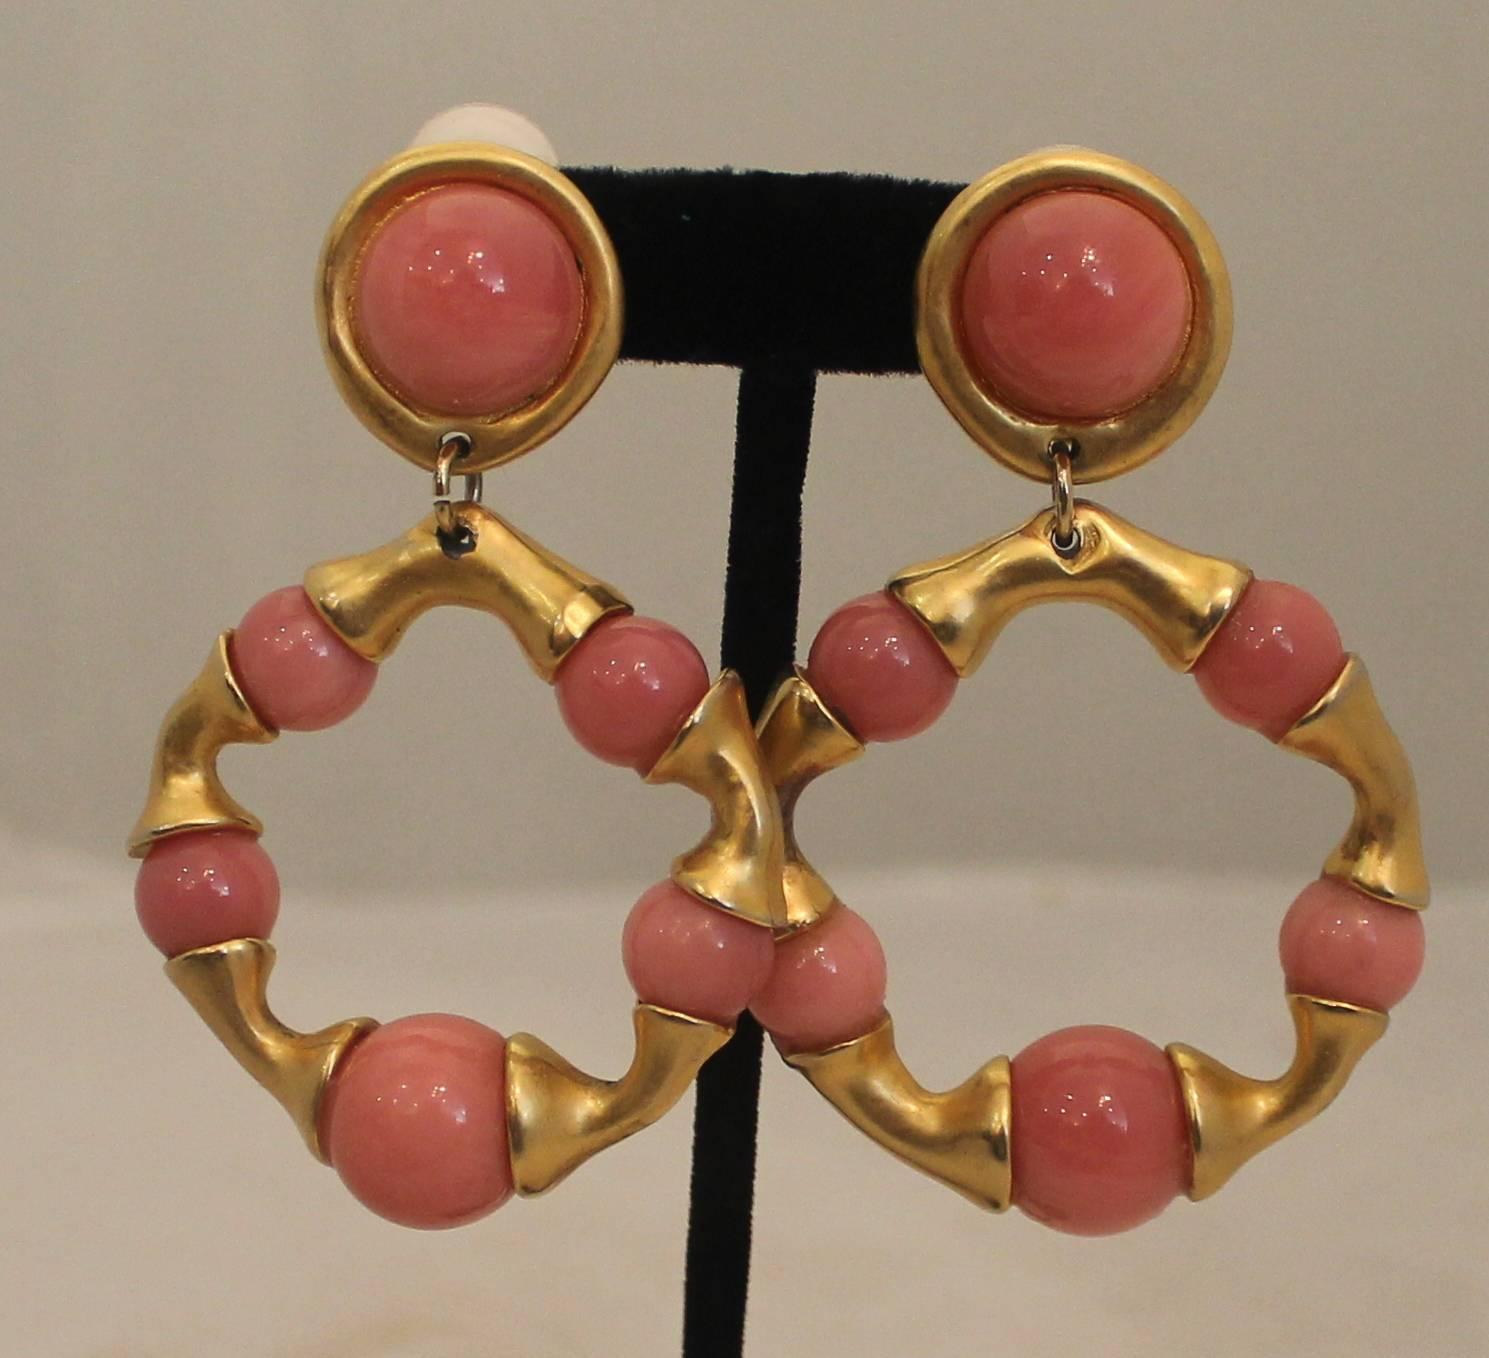 Chanel Goldtone & Pink Gripoix Hoop Clip-On Earrings - Circa 1993.  These lovely Chanel earrings are in very good vintage condition with only minor discolorations consistent with their age.  These feminine earrings feature a lovely goldtone metal, a